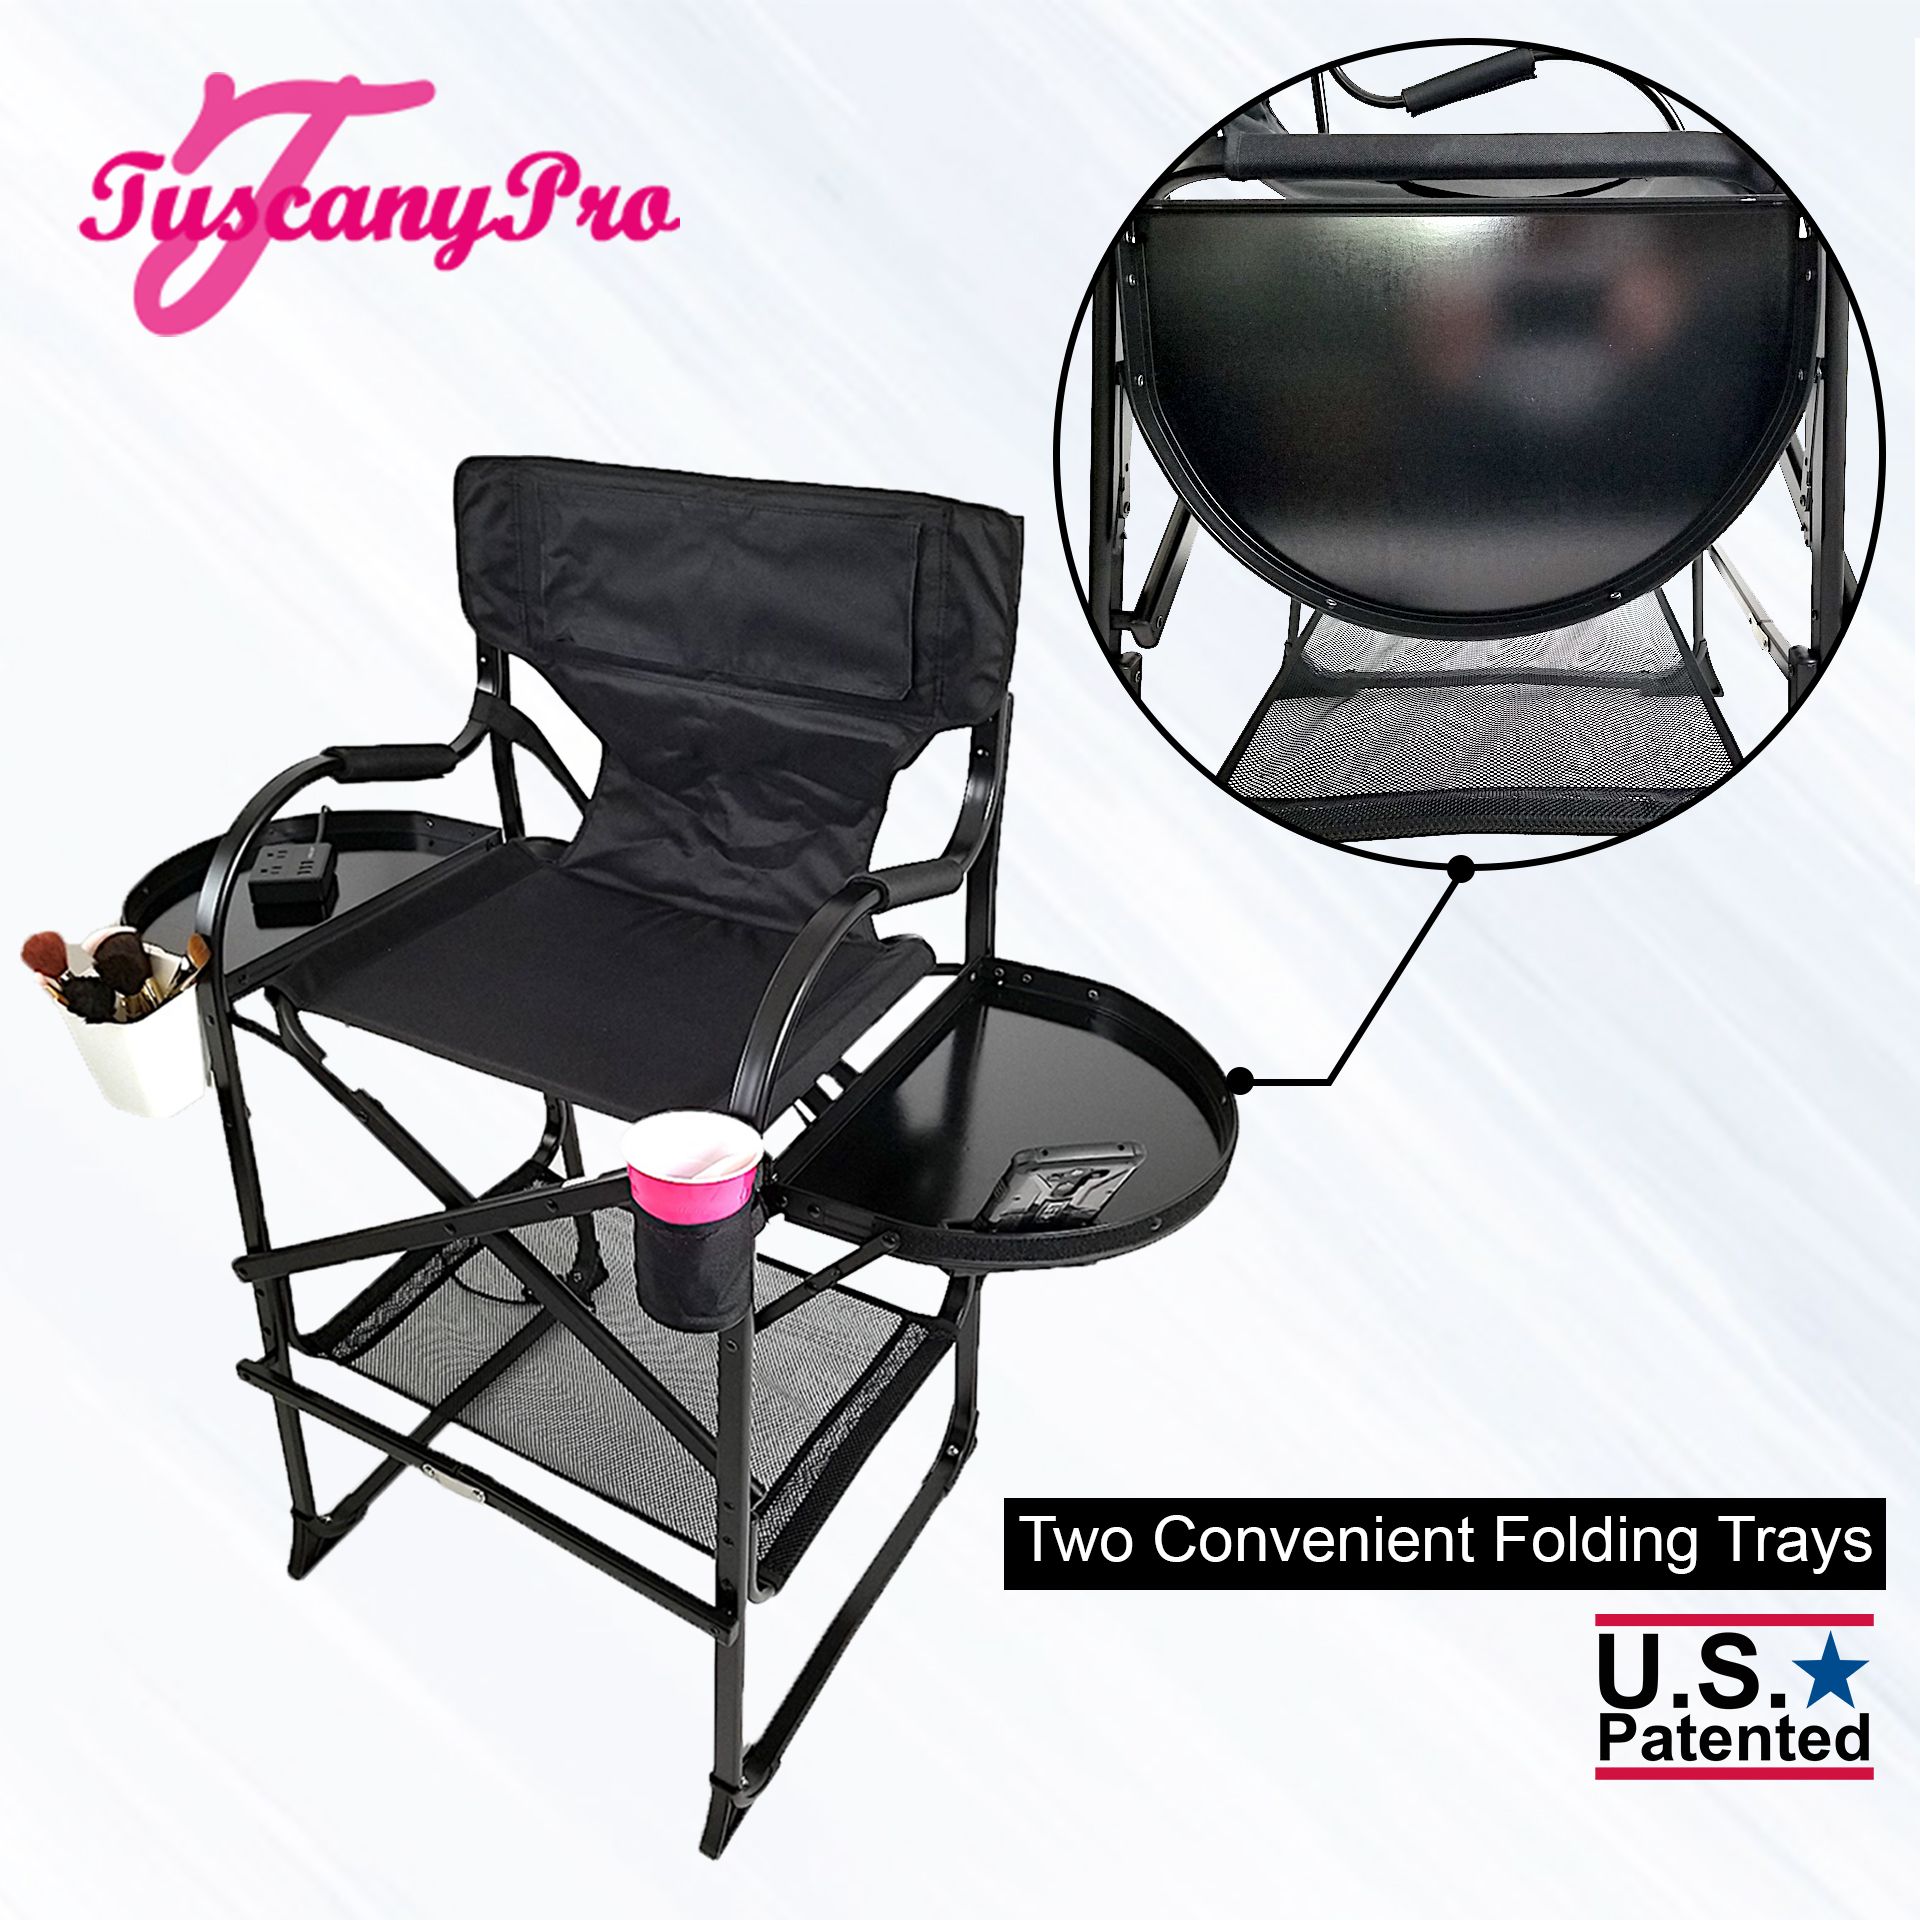 Tuscanypro Classic Makeup And Hair Chair - Power Strip Package